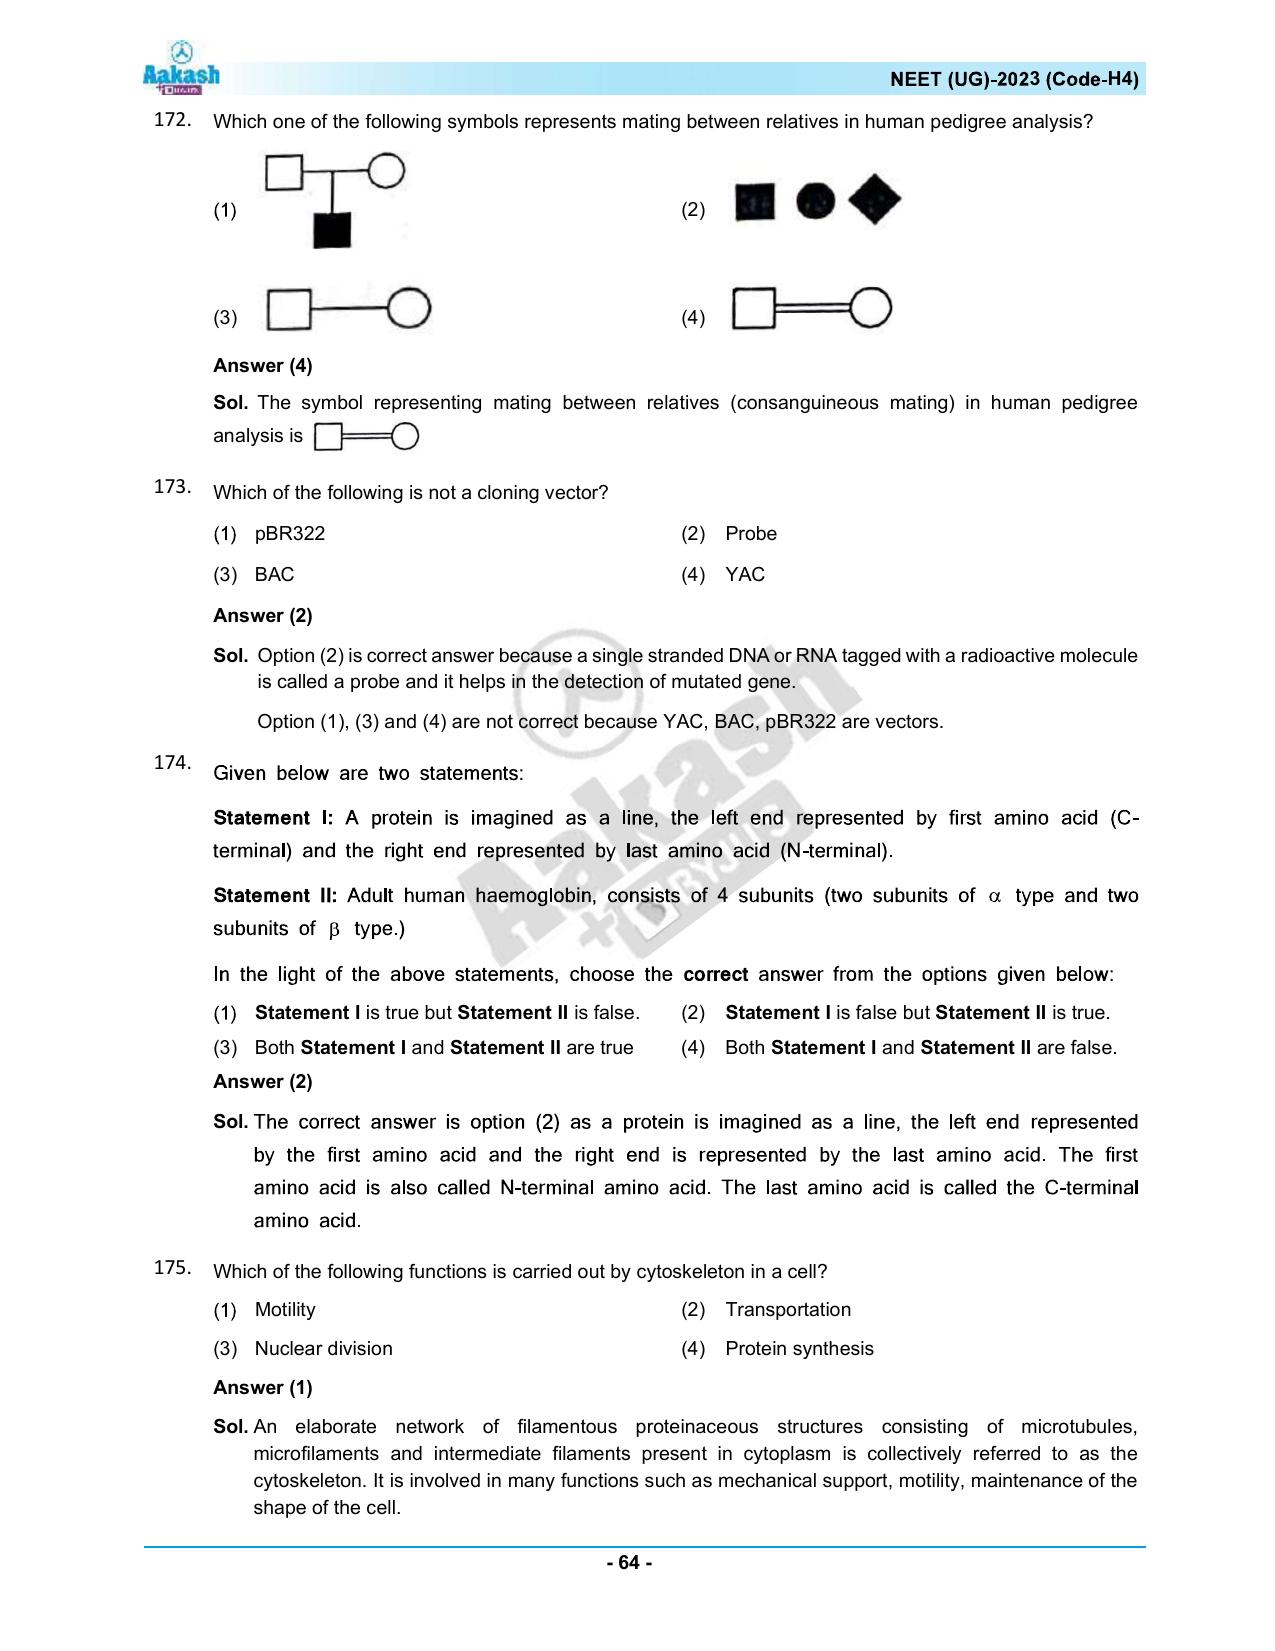 NEET 2023 Question Paper H4 - Page 64